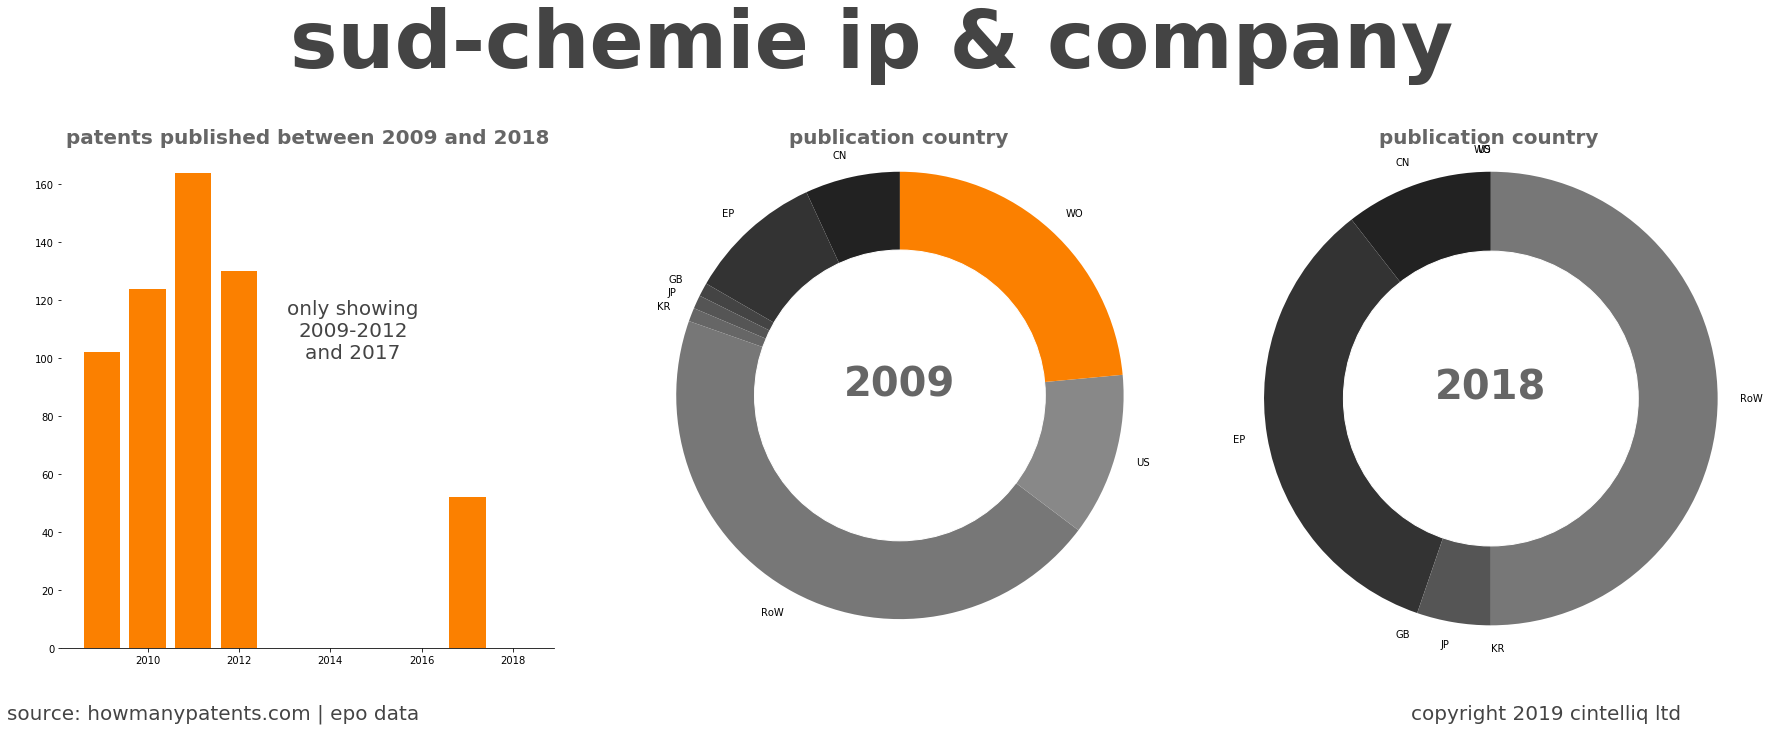 summary of patents for Sud-Chemie Ip & Company